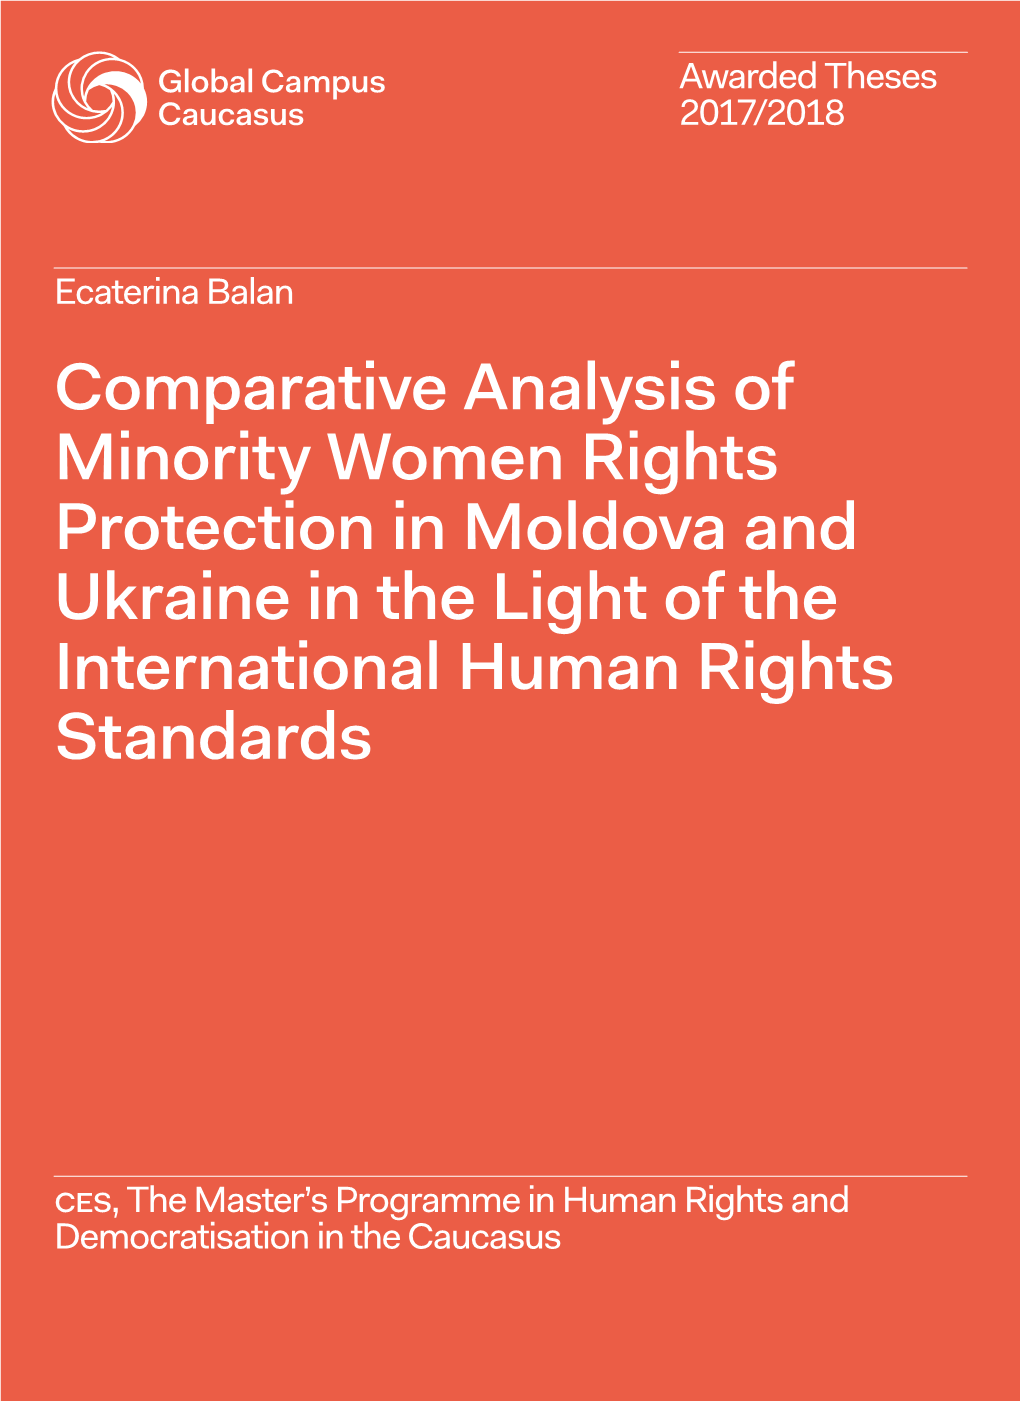 Comparative Analysis of Minority Women Rights Protection in Moldova and Ukraine in the Light of the International Human Rights Standards